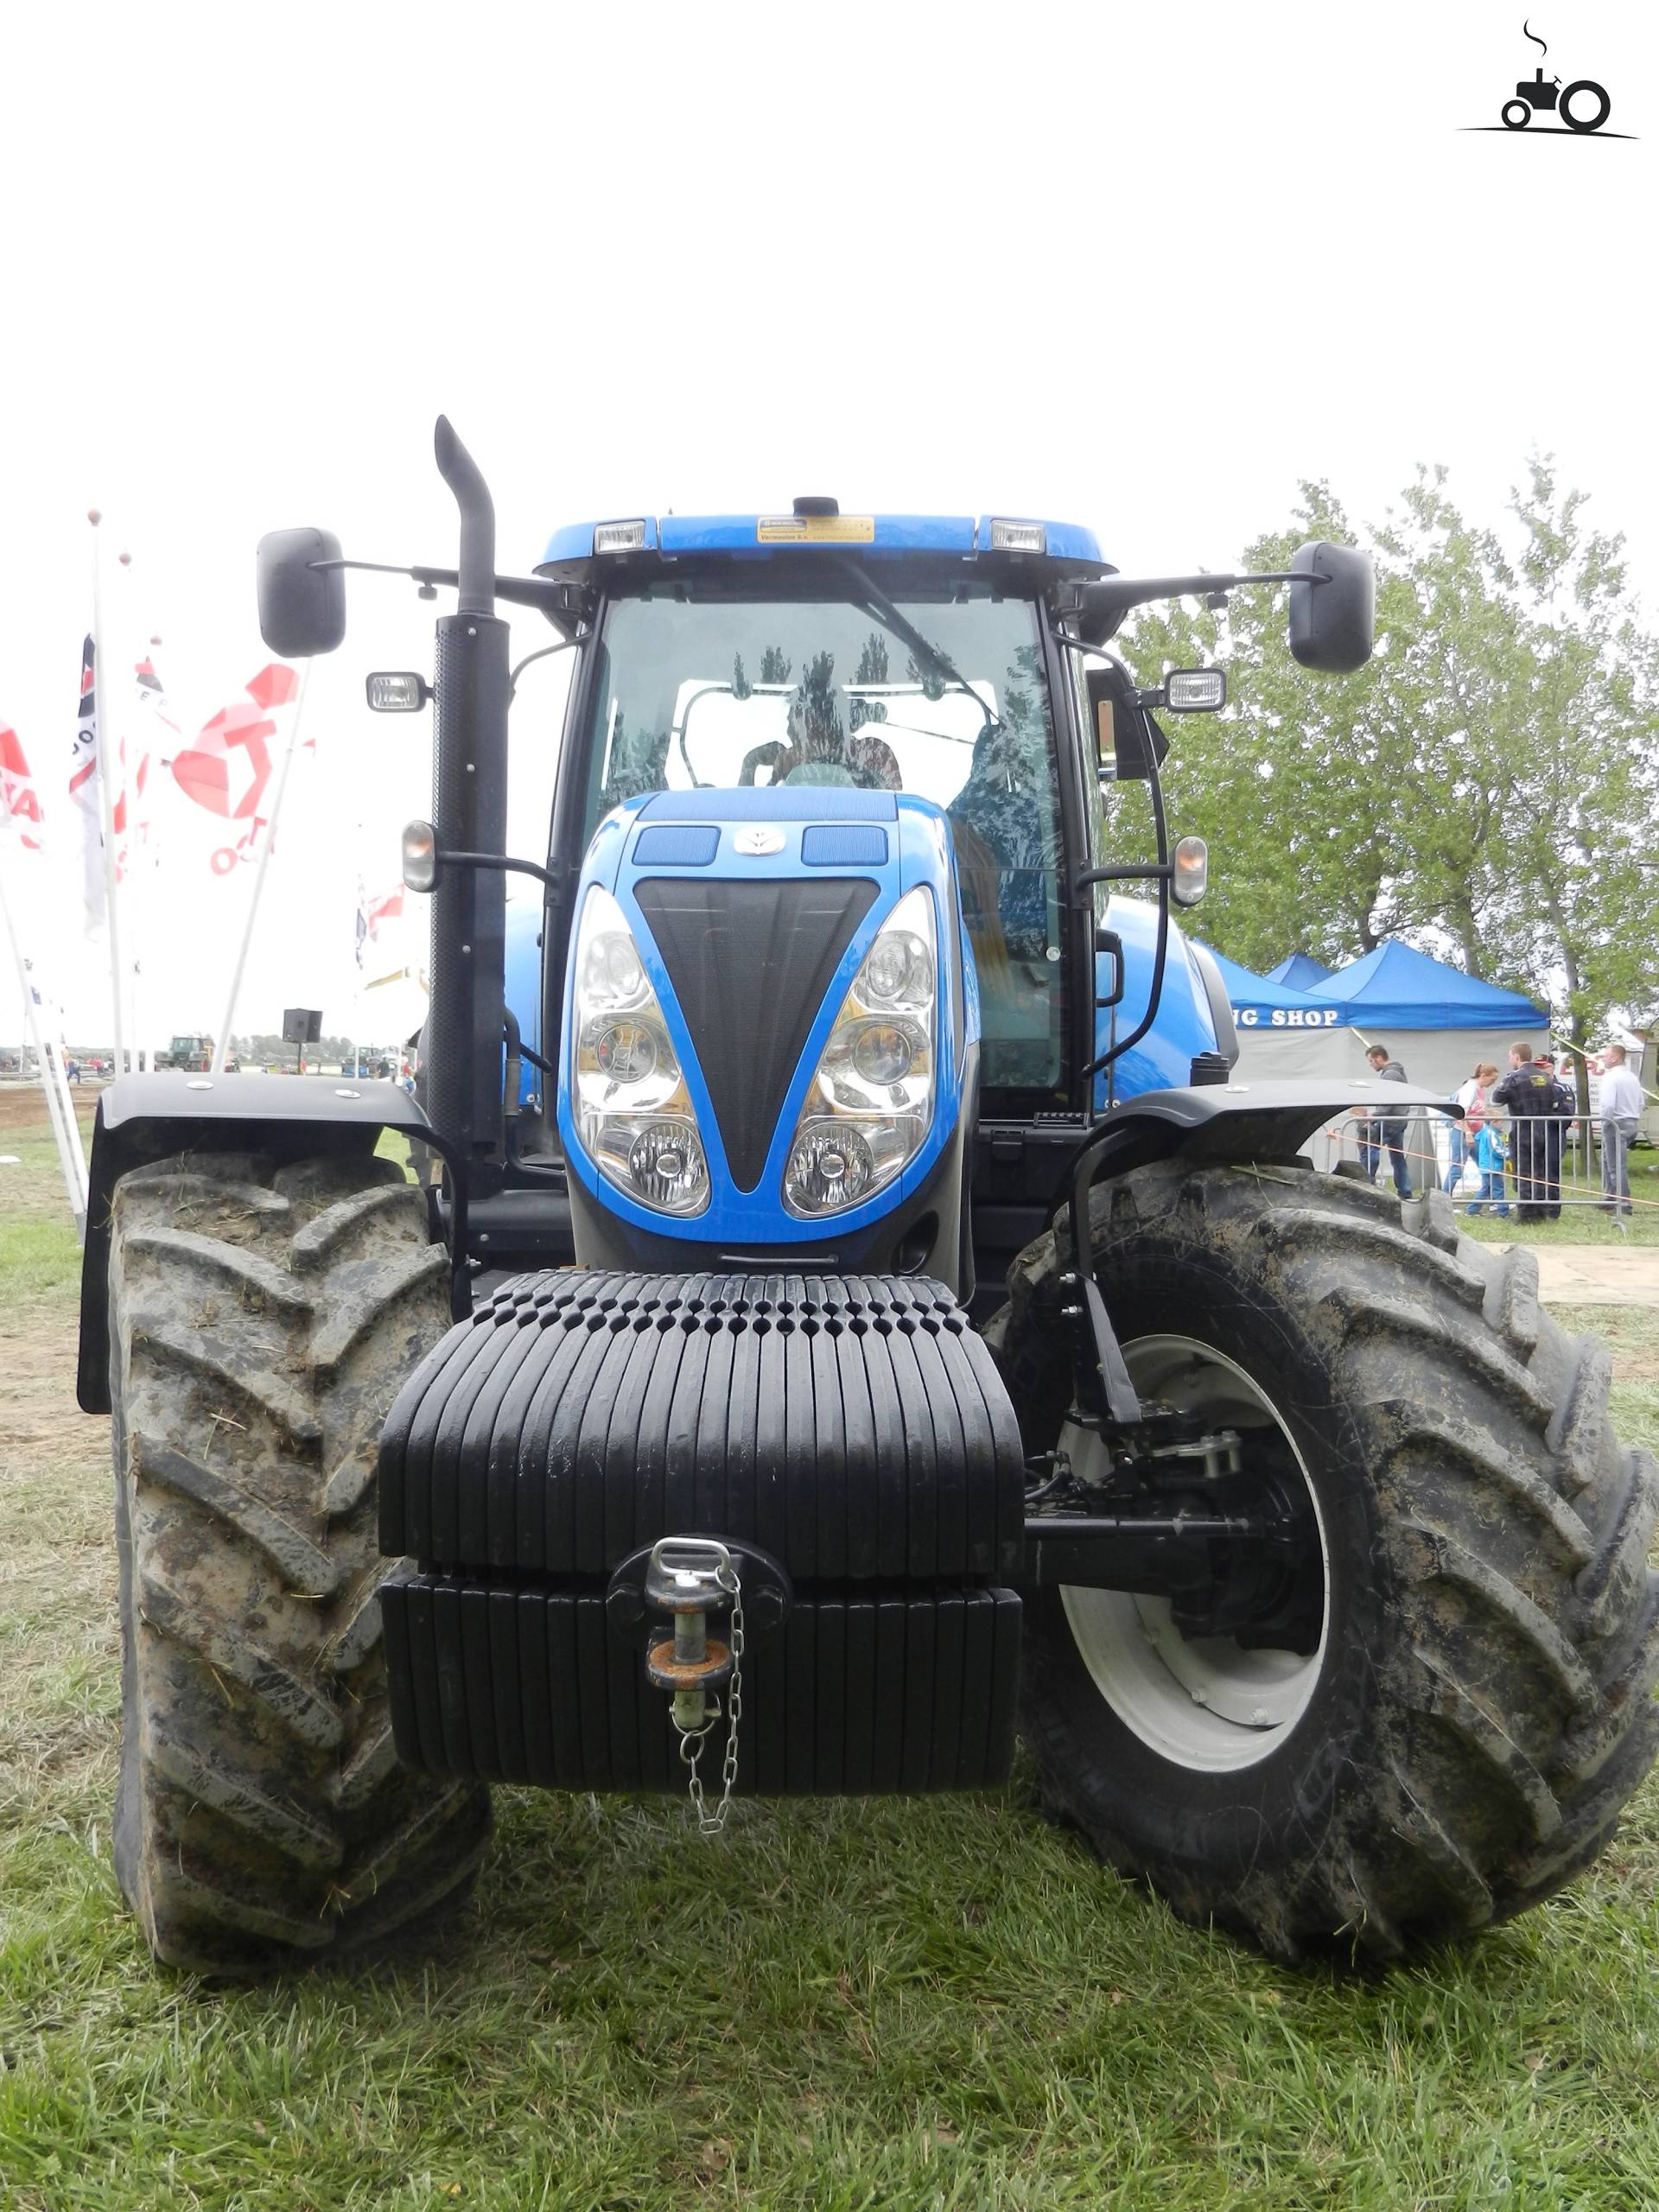 New Holland T 6090